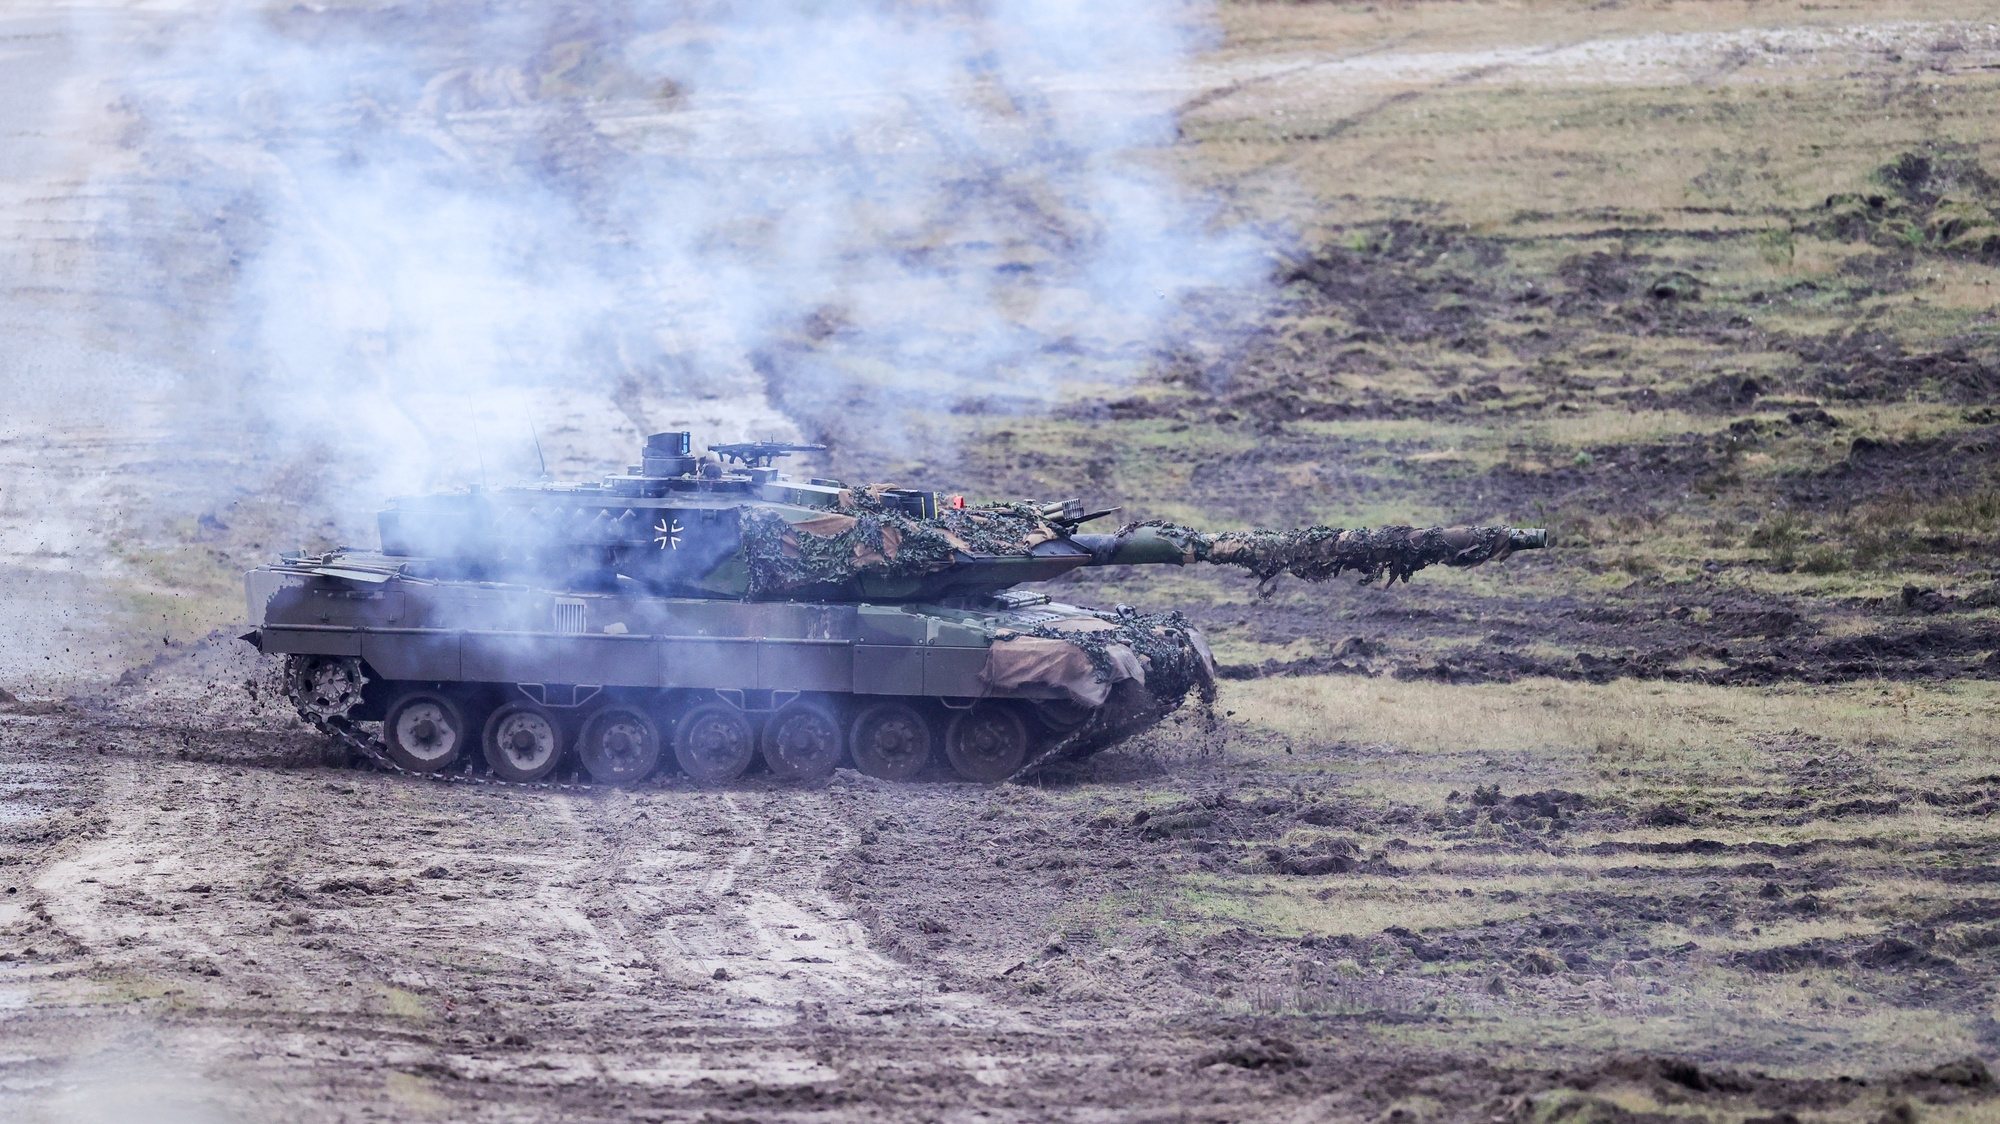 epa10442856 A &#039;Leopard 2 A6&#039; battle tank in action during a visit of German Defense Minister Pistorius (not pictured) to German armed forces Bundeswehr soldiers of the tank battalion 203 in Augustdorf, Germany, 01 February 2023. According to the German government&#039;s decision to supply 14 Leopard 2 tanks to Ukraine, Pistorius got informed about the performance of the weapon system.  EPA/FRIEDEMANN VOGEL